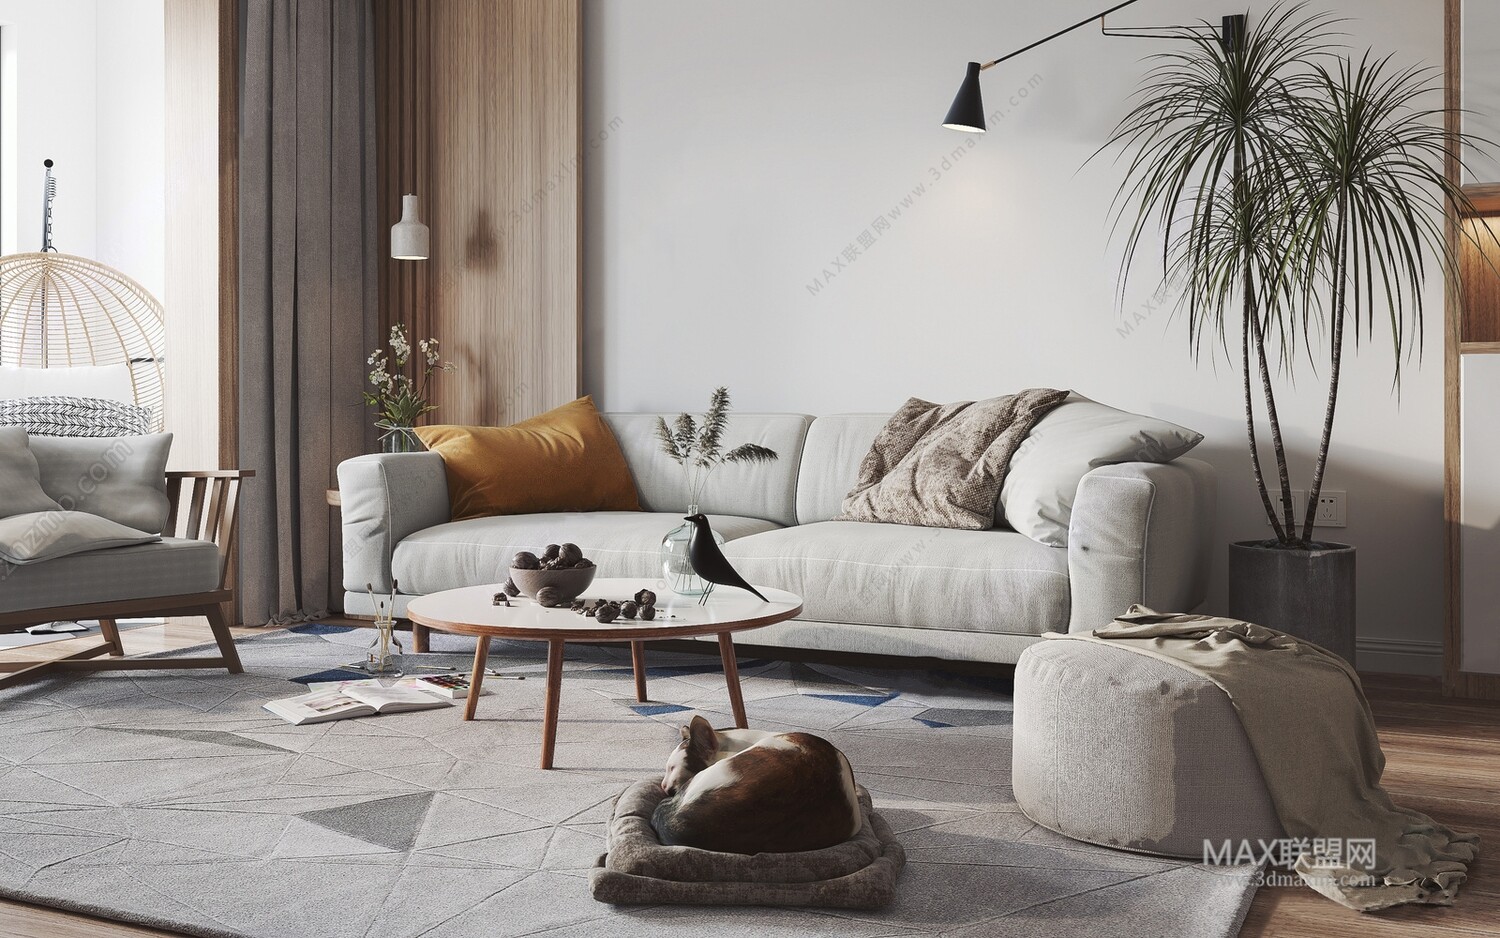 FREE LIVING ROOM 3D MODELS 37. Vray - 3ds Max